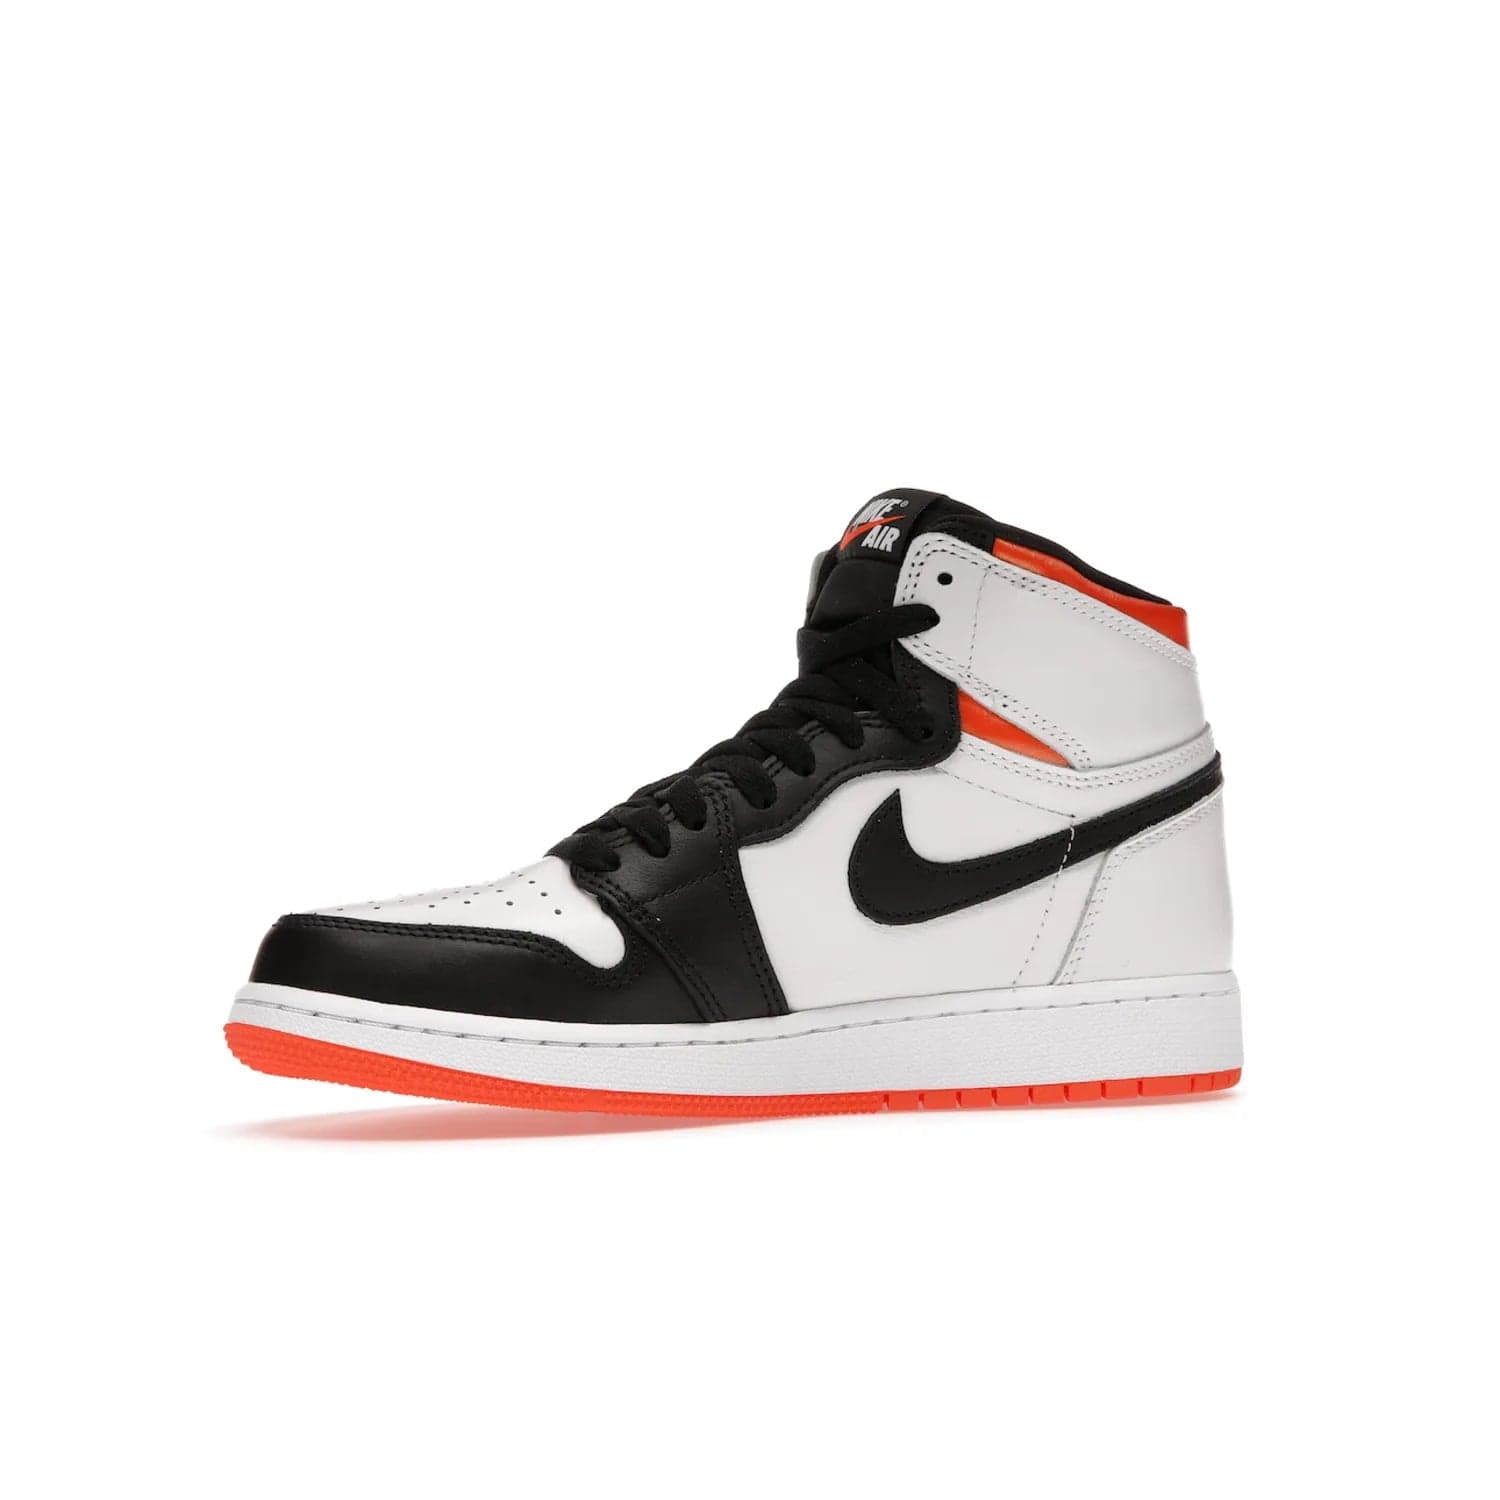 Jordan 1 High OG Electro Orange (GS) - Image 17 - Only at www.BallersClubKickz.com - The Air Jordan 1 High OG Electro Orange GS is the ideal shoe for kids on the go. Featuring white leather uppers, black overlays, and bright orange accents, it's sure to become a favorite. A great mix of classic style and vibrant colors, the shoe delivers air cushioning for comfort and hard orange rubber for grip. Release on July 17th, 2021. Get them a pair today.